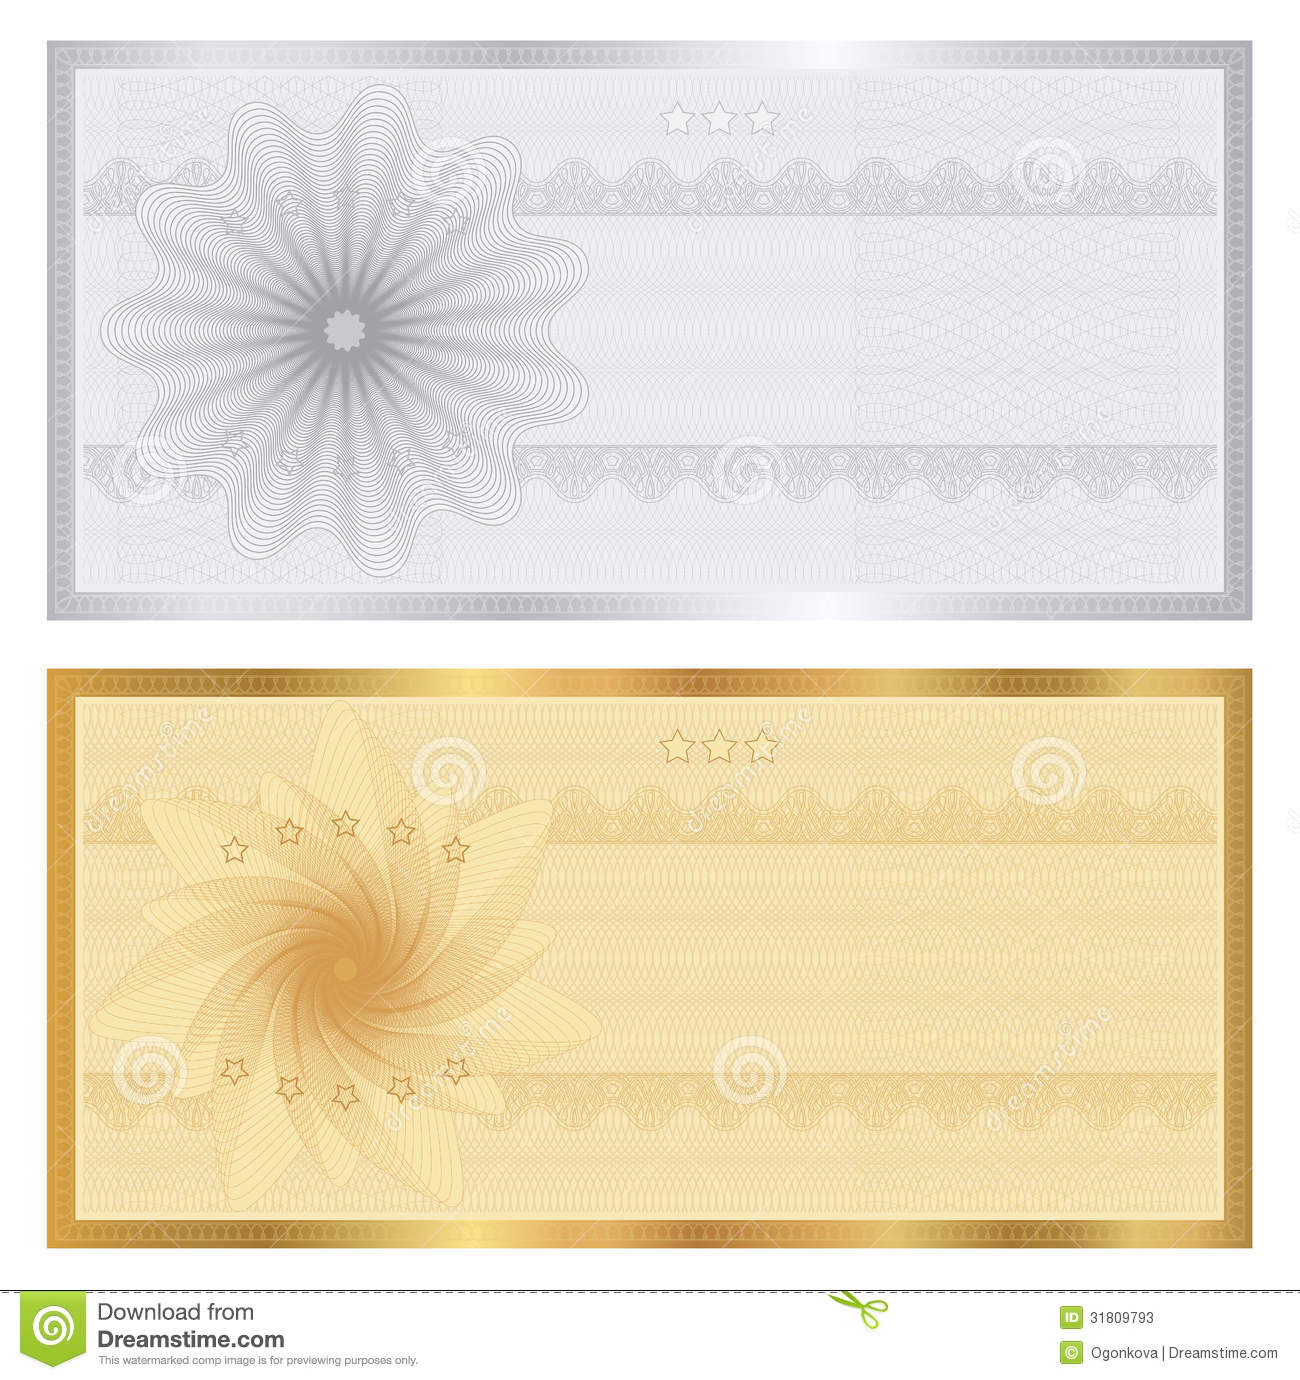 Gift Certificate   Voucher   Coupon Template With Guilloche Pattern